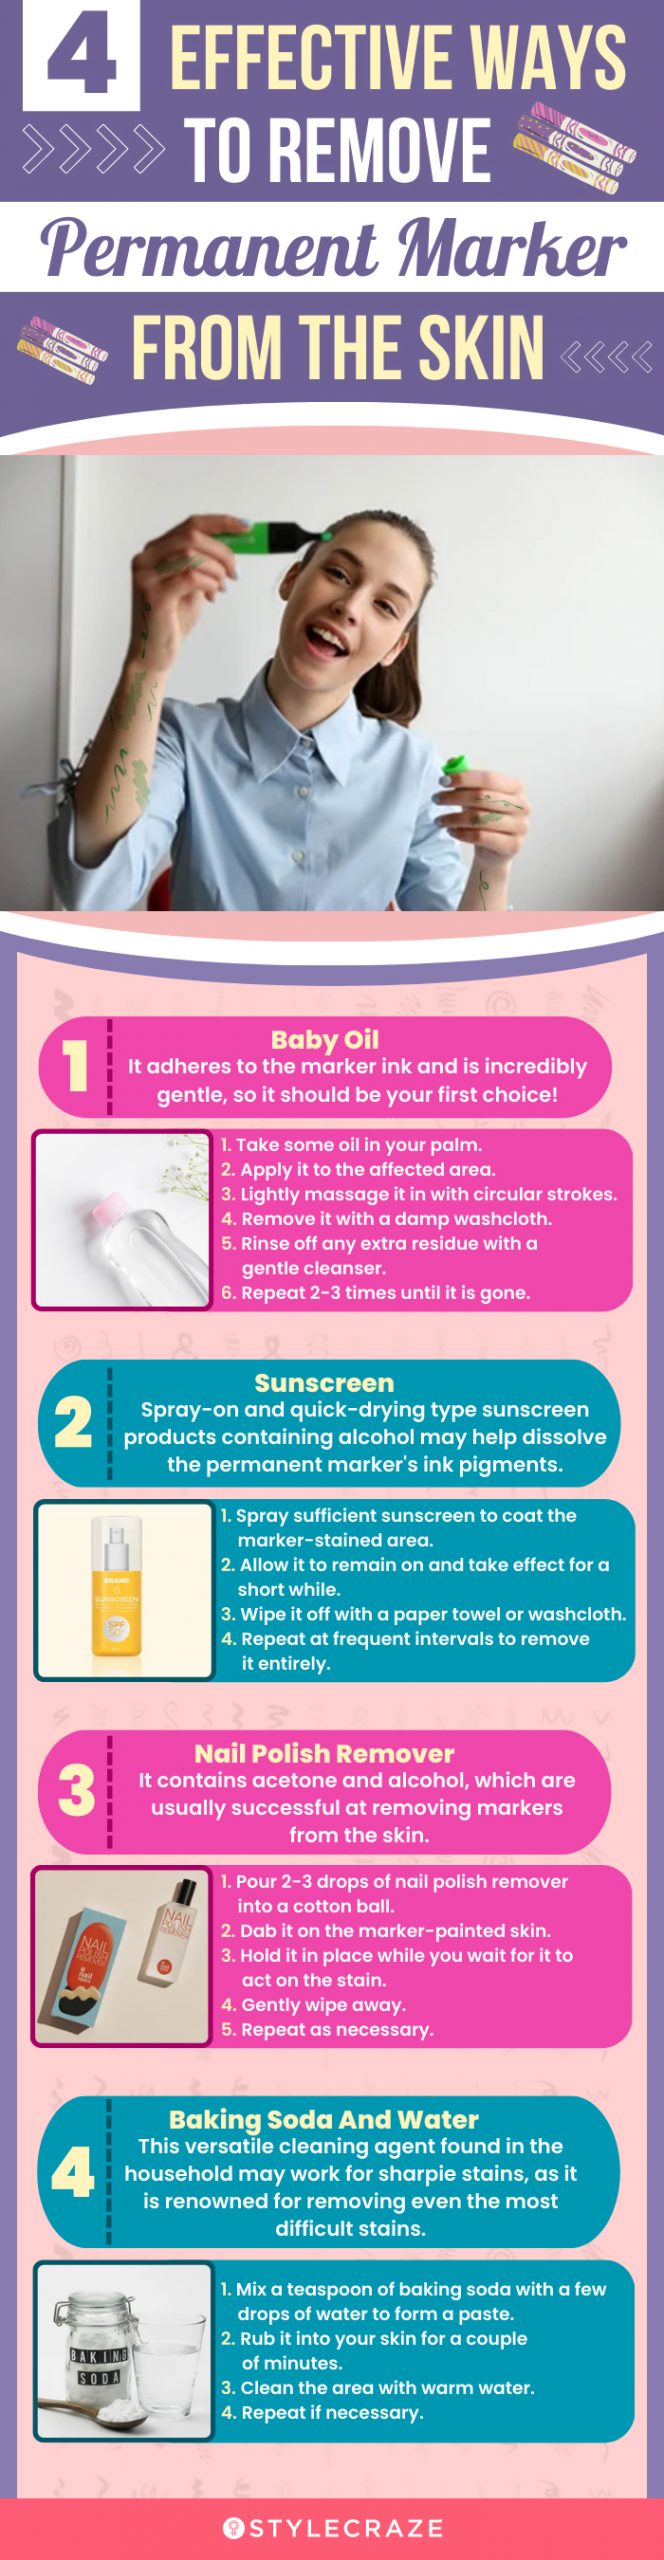 4 effective ways to remove permanent marker from the skin (infographic)